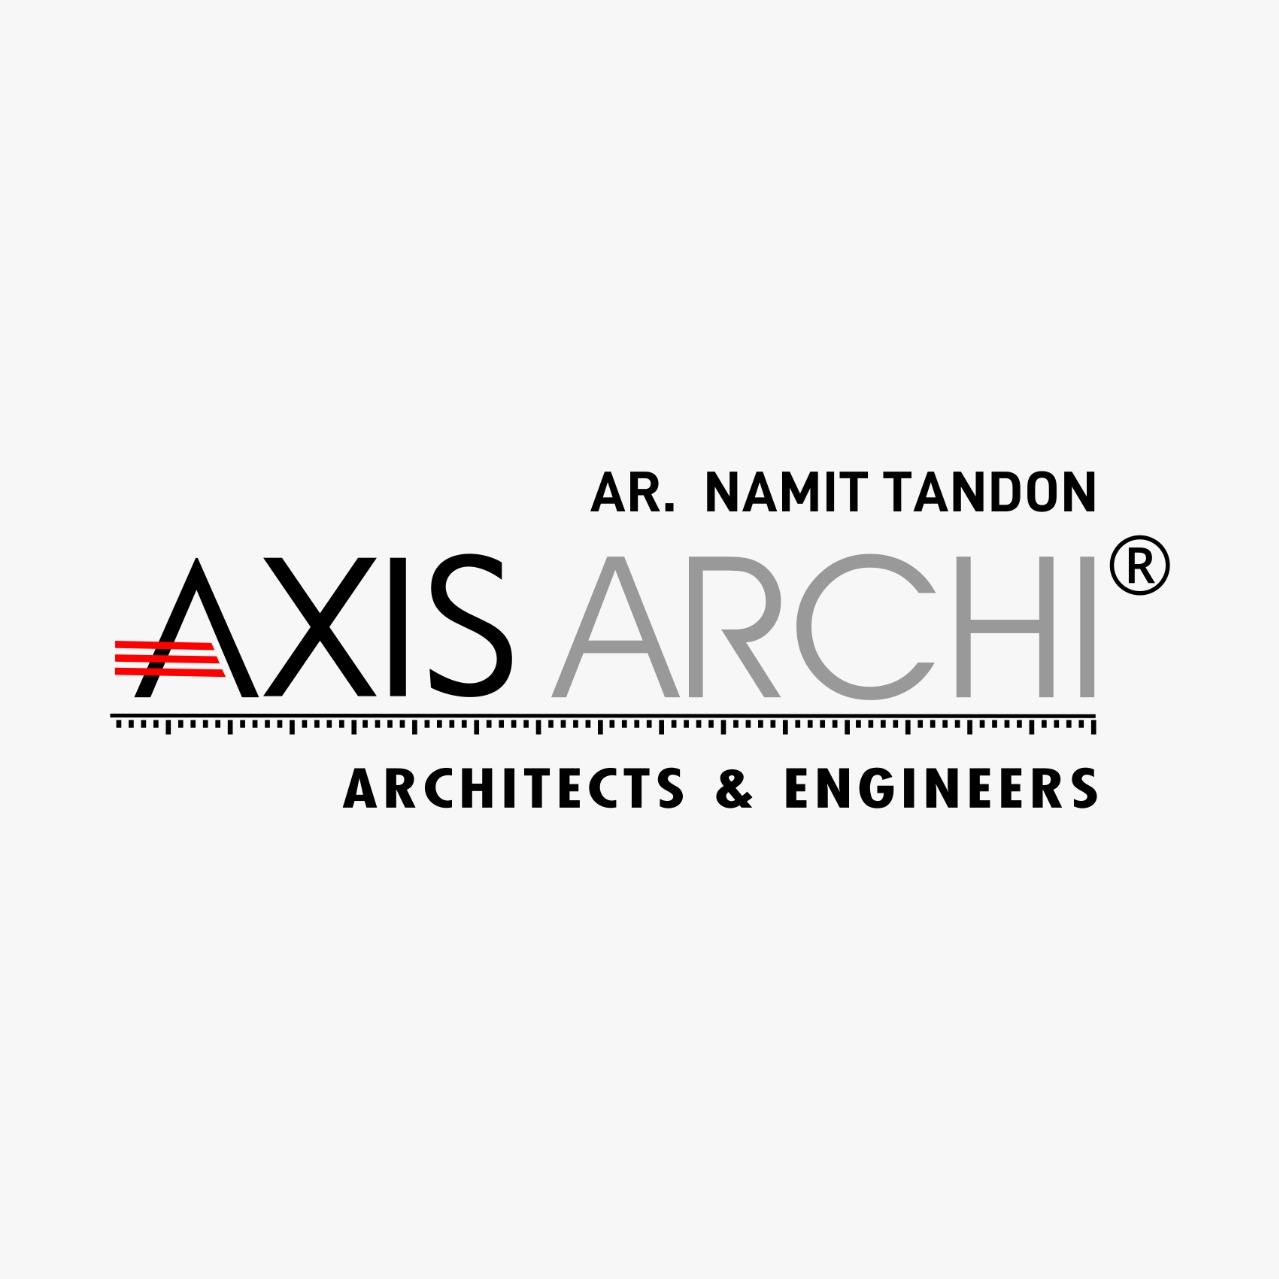 Axis Archi | Architect Namit Tandon|Architect|Professional Services